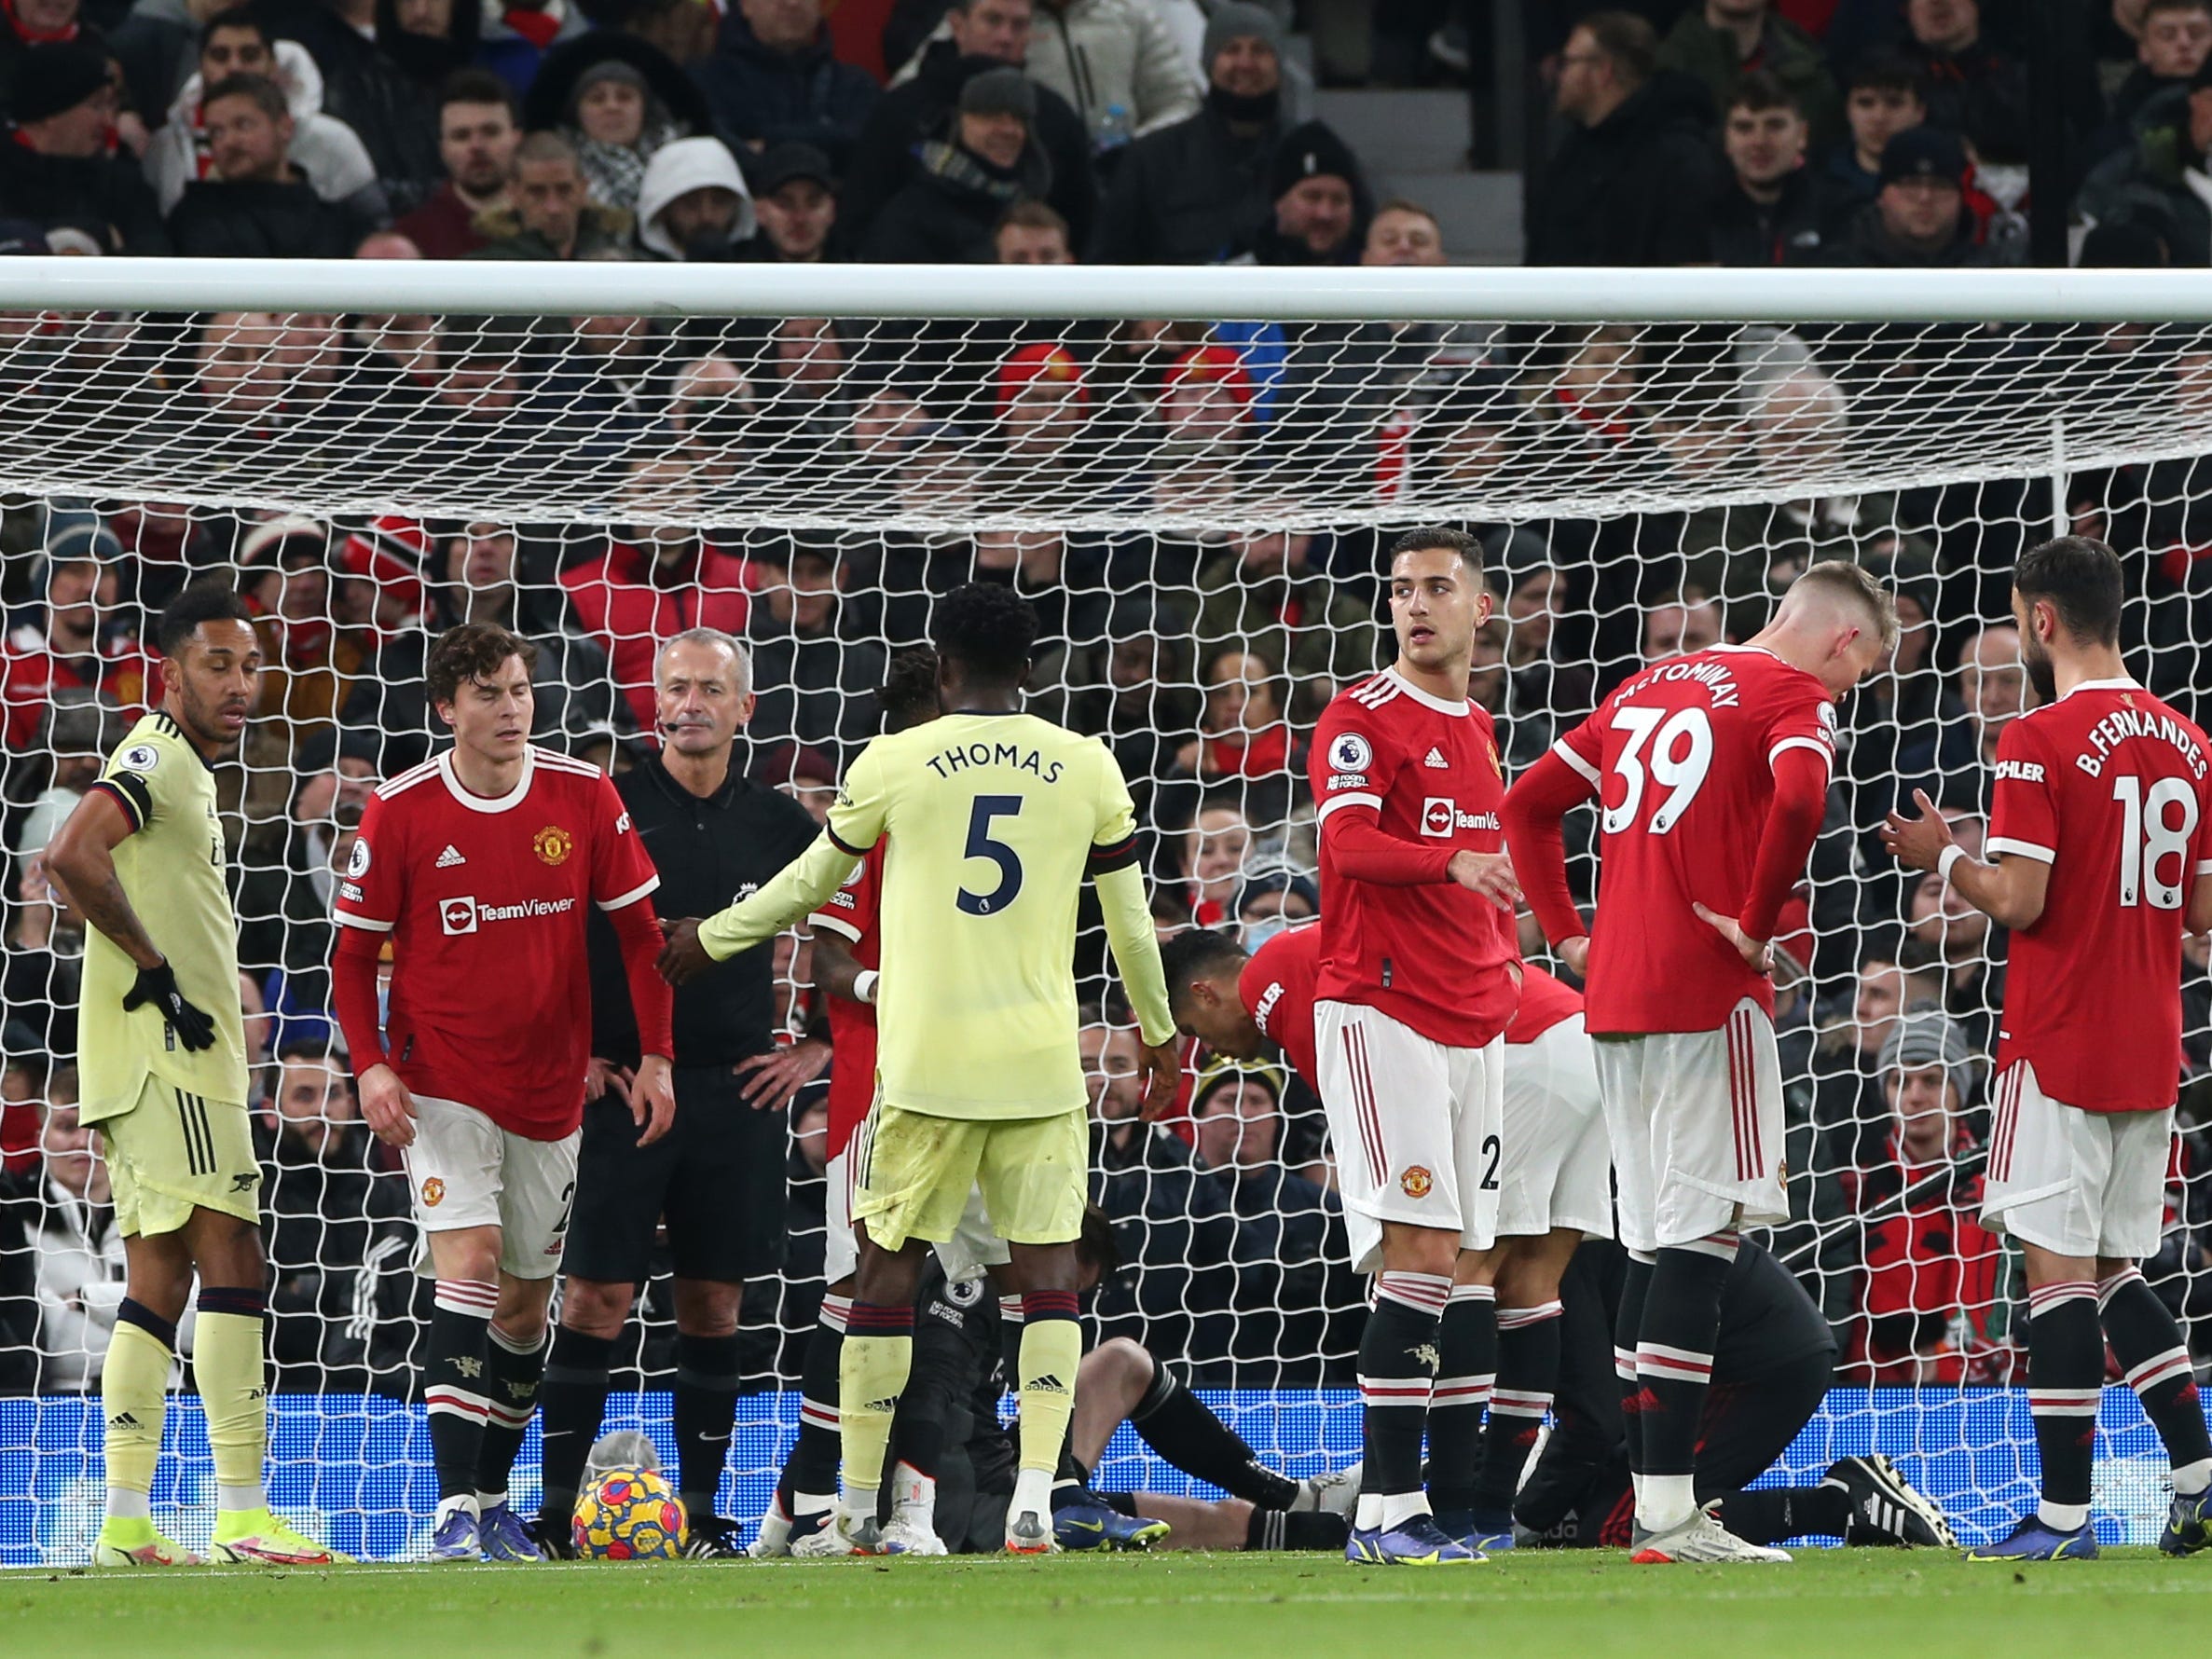 David de Gea of Manchester United is treated prior to the opening goal during the Premier League match between Manchester United and Arsenal